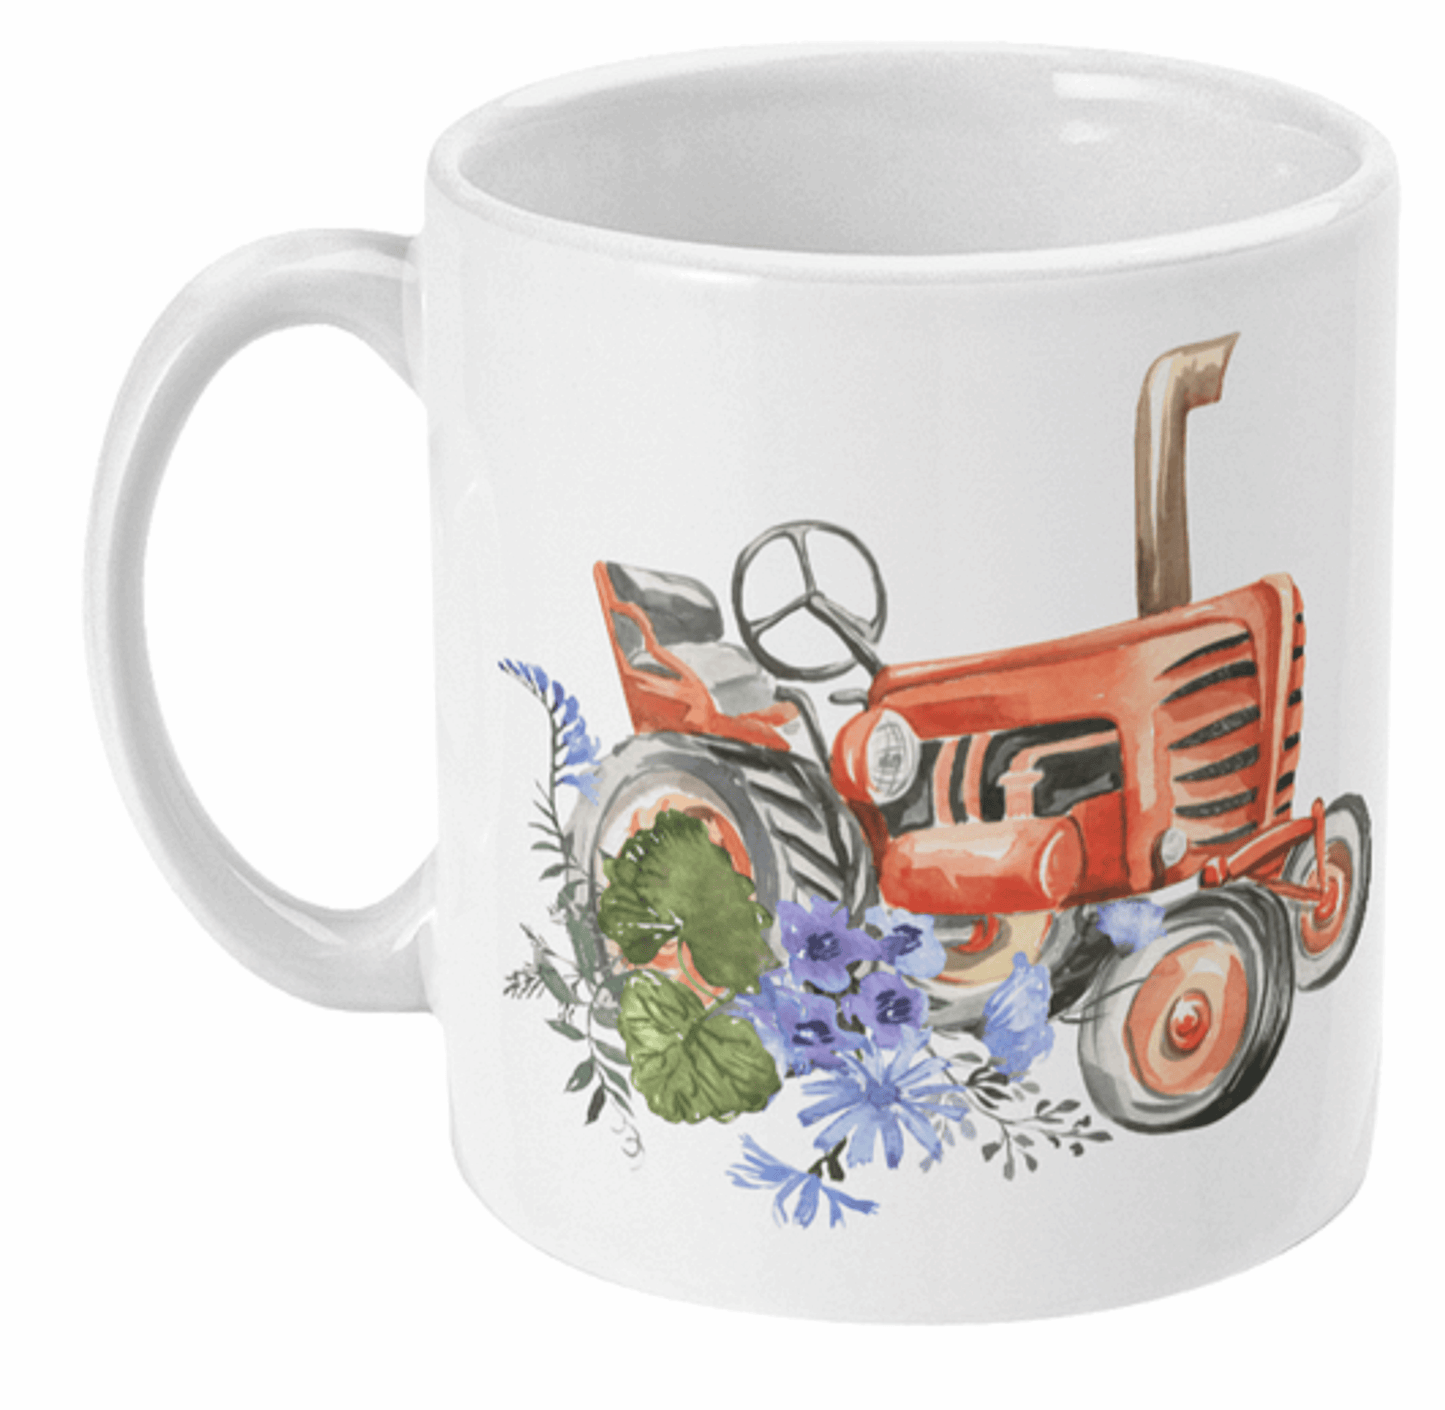  Beautiful Old Fashion Tractor With Flowers Mug by Free Spirit Accessories sold by Free Spirit Accessories